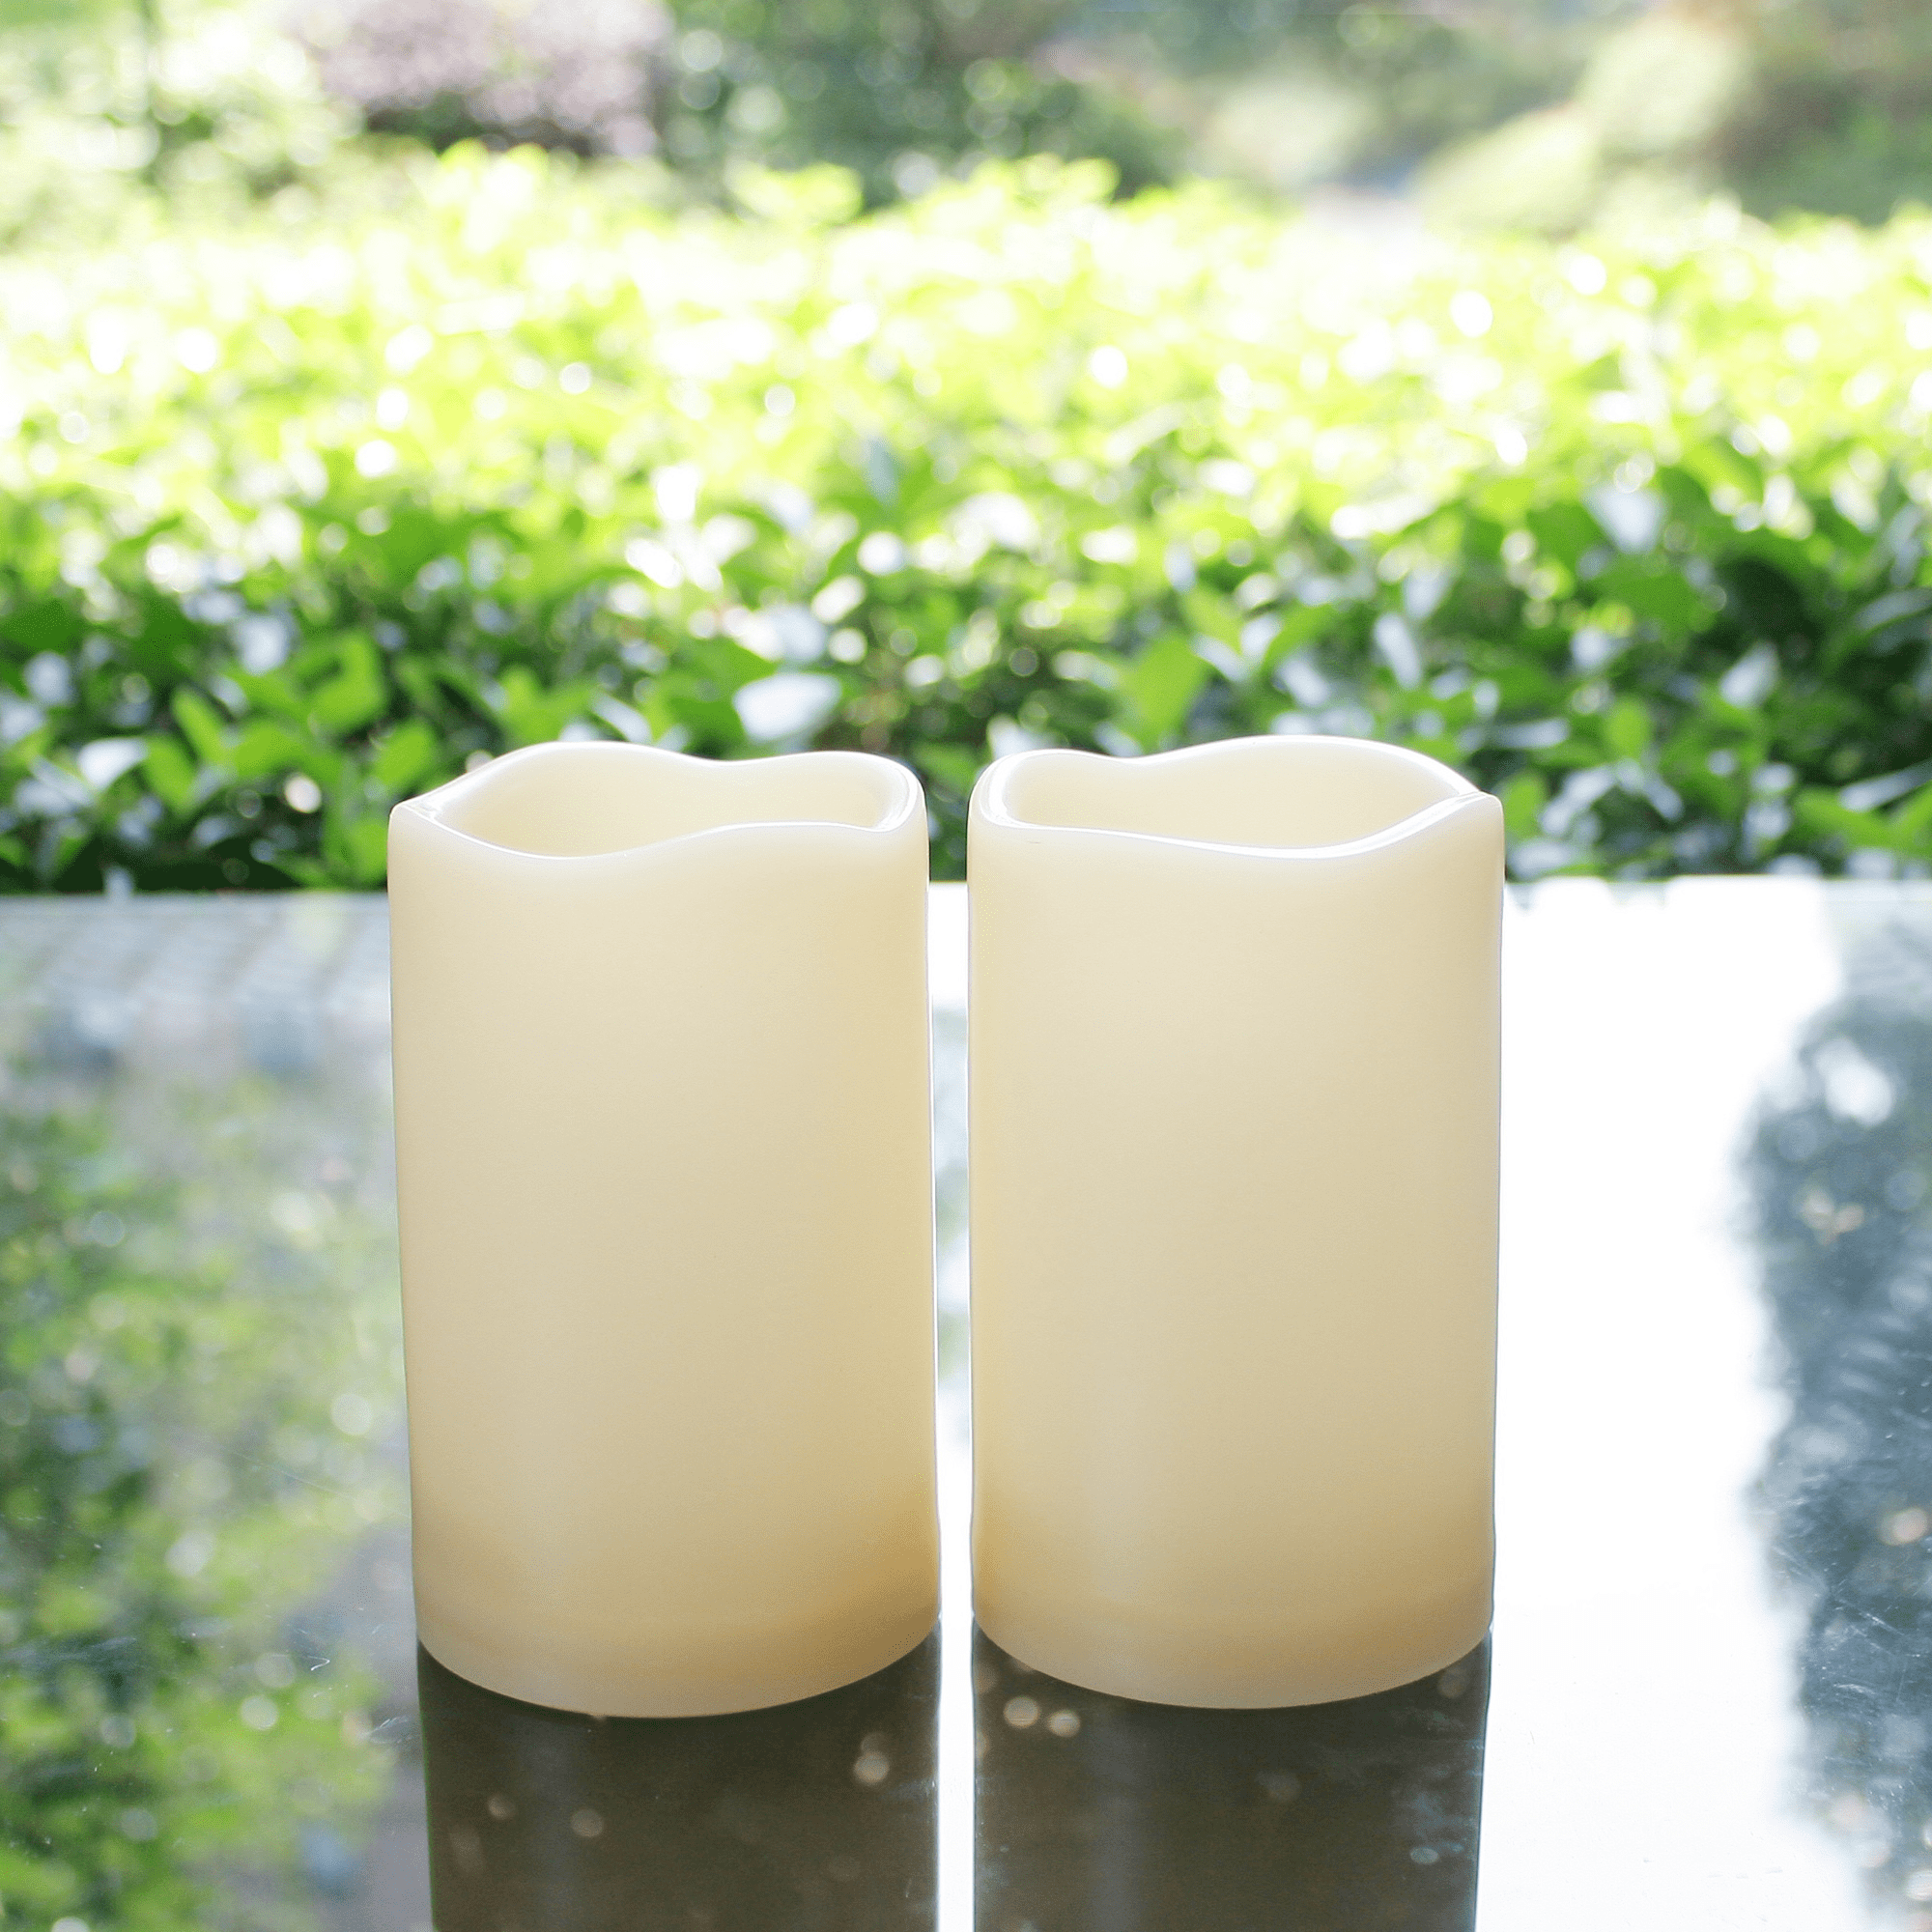 【Timer 10 Pcs】Indoor and Outdoor LED Window Flameless Taper Candles Flickering Votive Unscented Battery Operated Electric TeaLights with Remote for Gift Party Wedding Holiday Tree Garden 